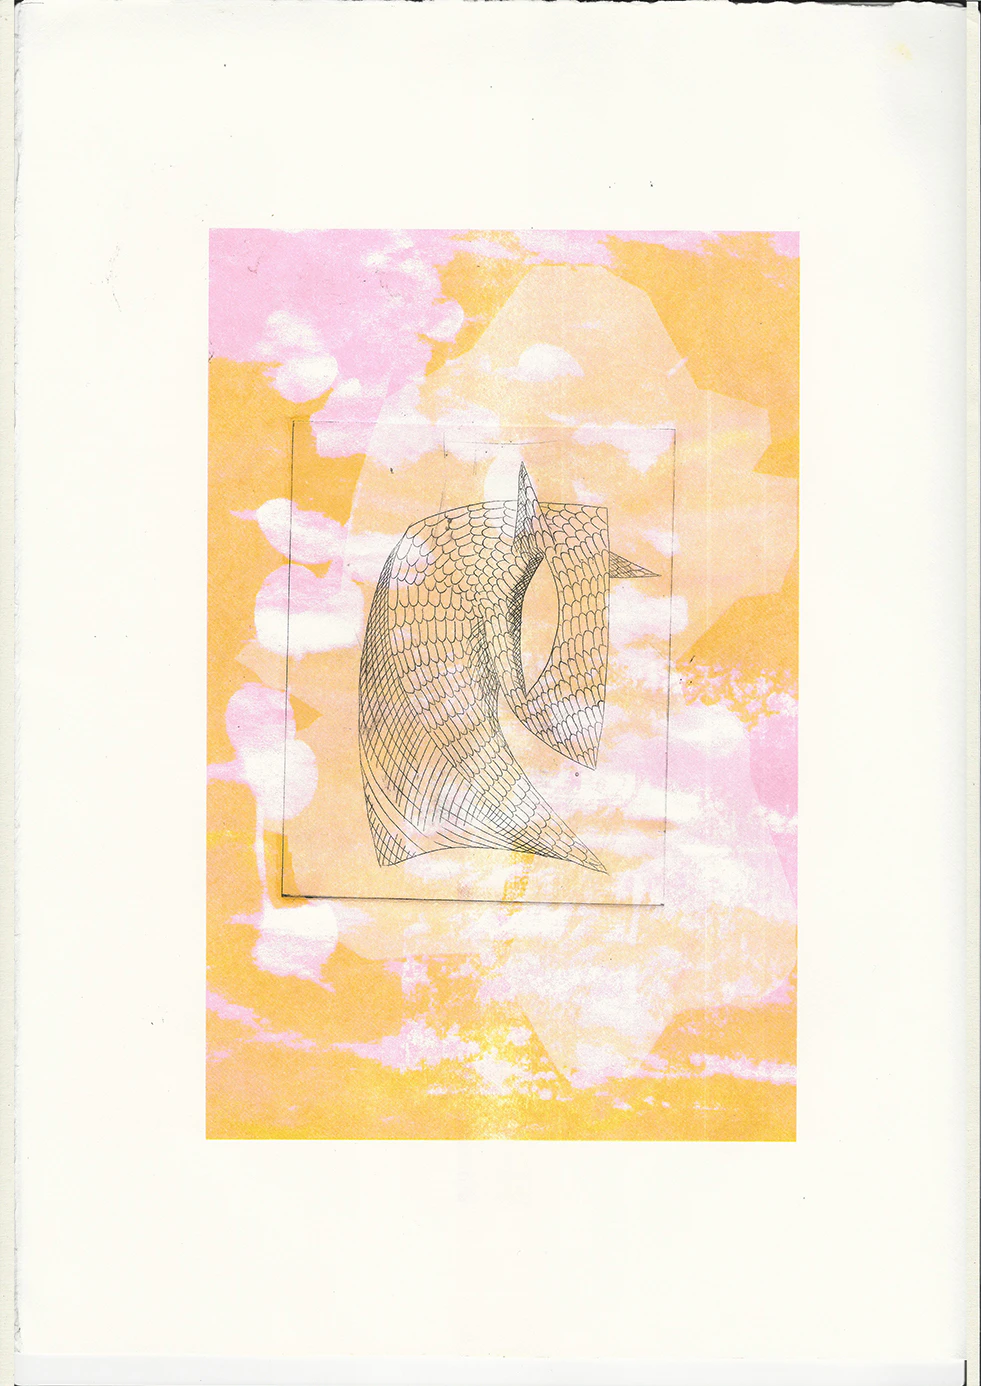 Risograph + Elctro-etching experimental prints